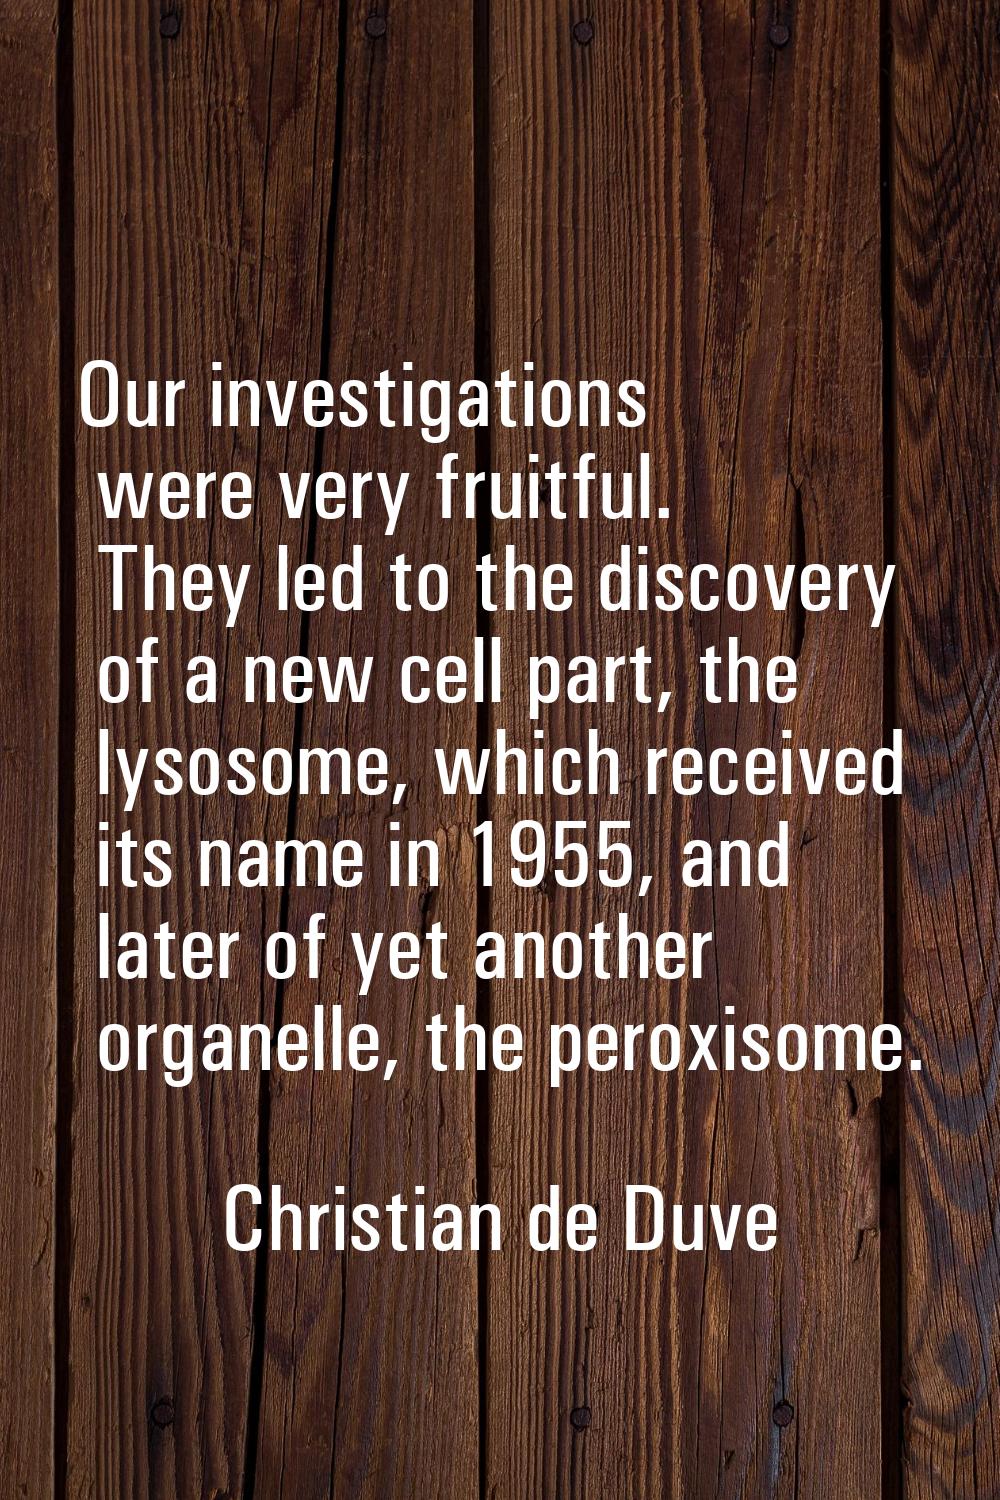 Our investigations were very fruitful. They led to the discovery of a new cell part, the lysosome, 